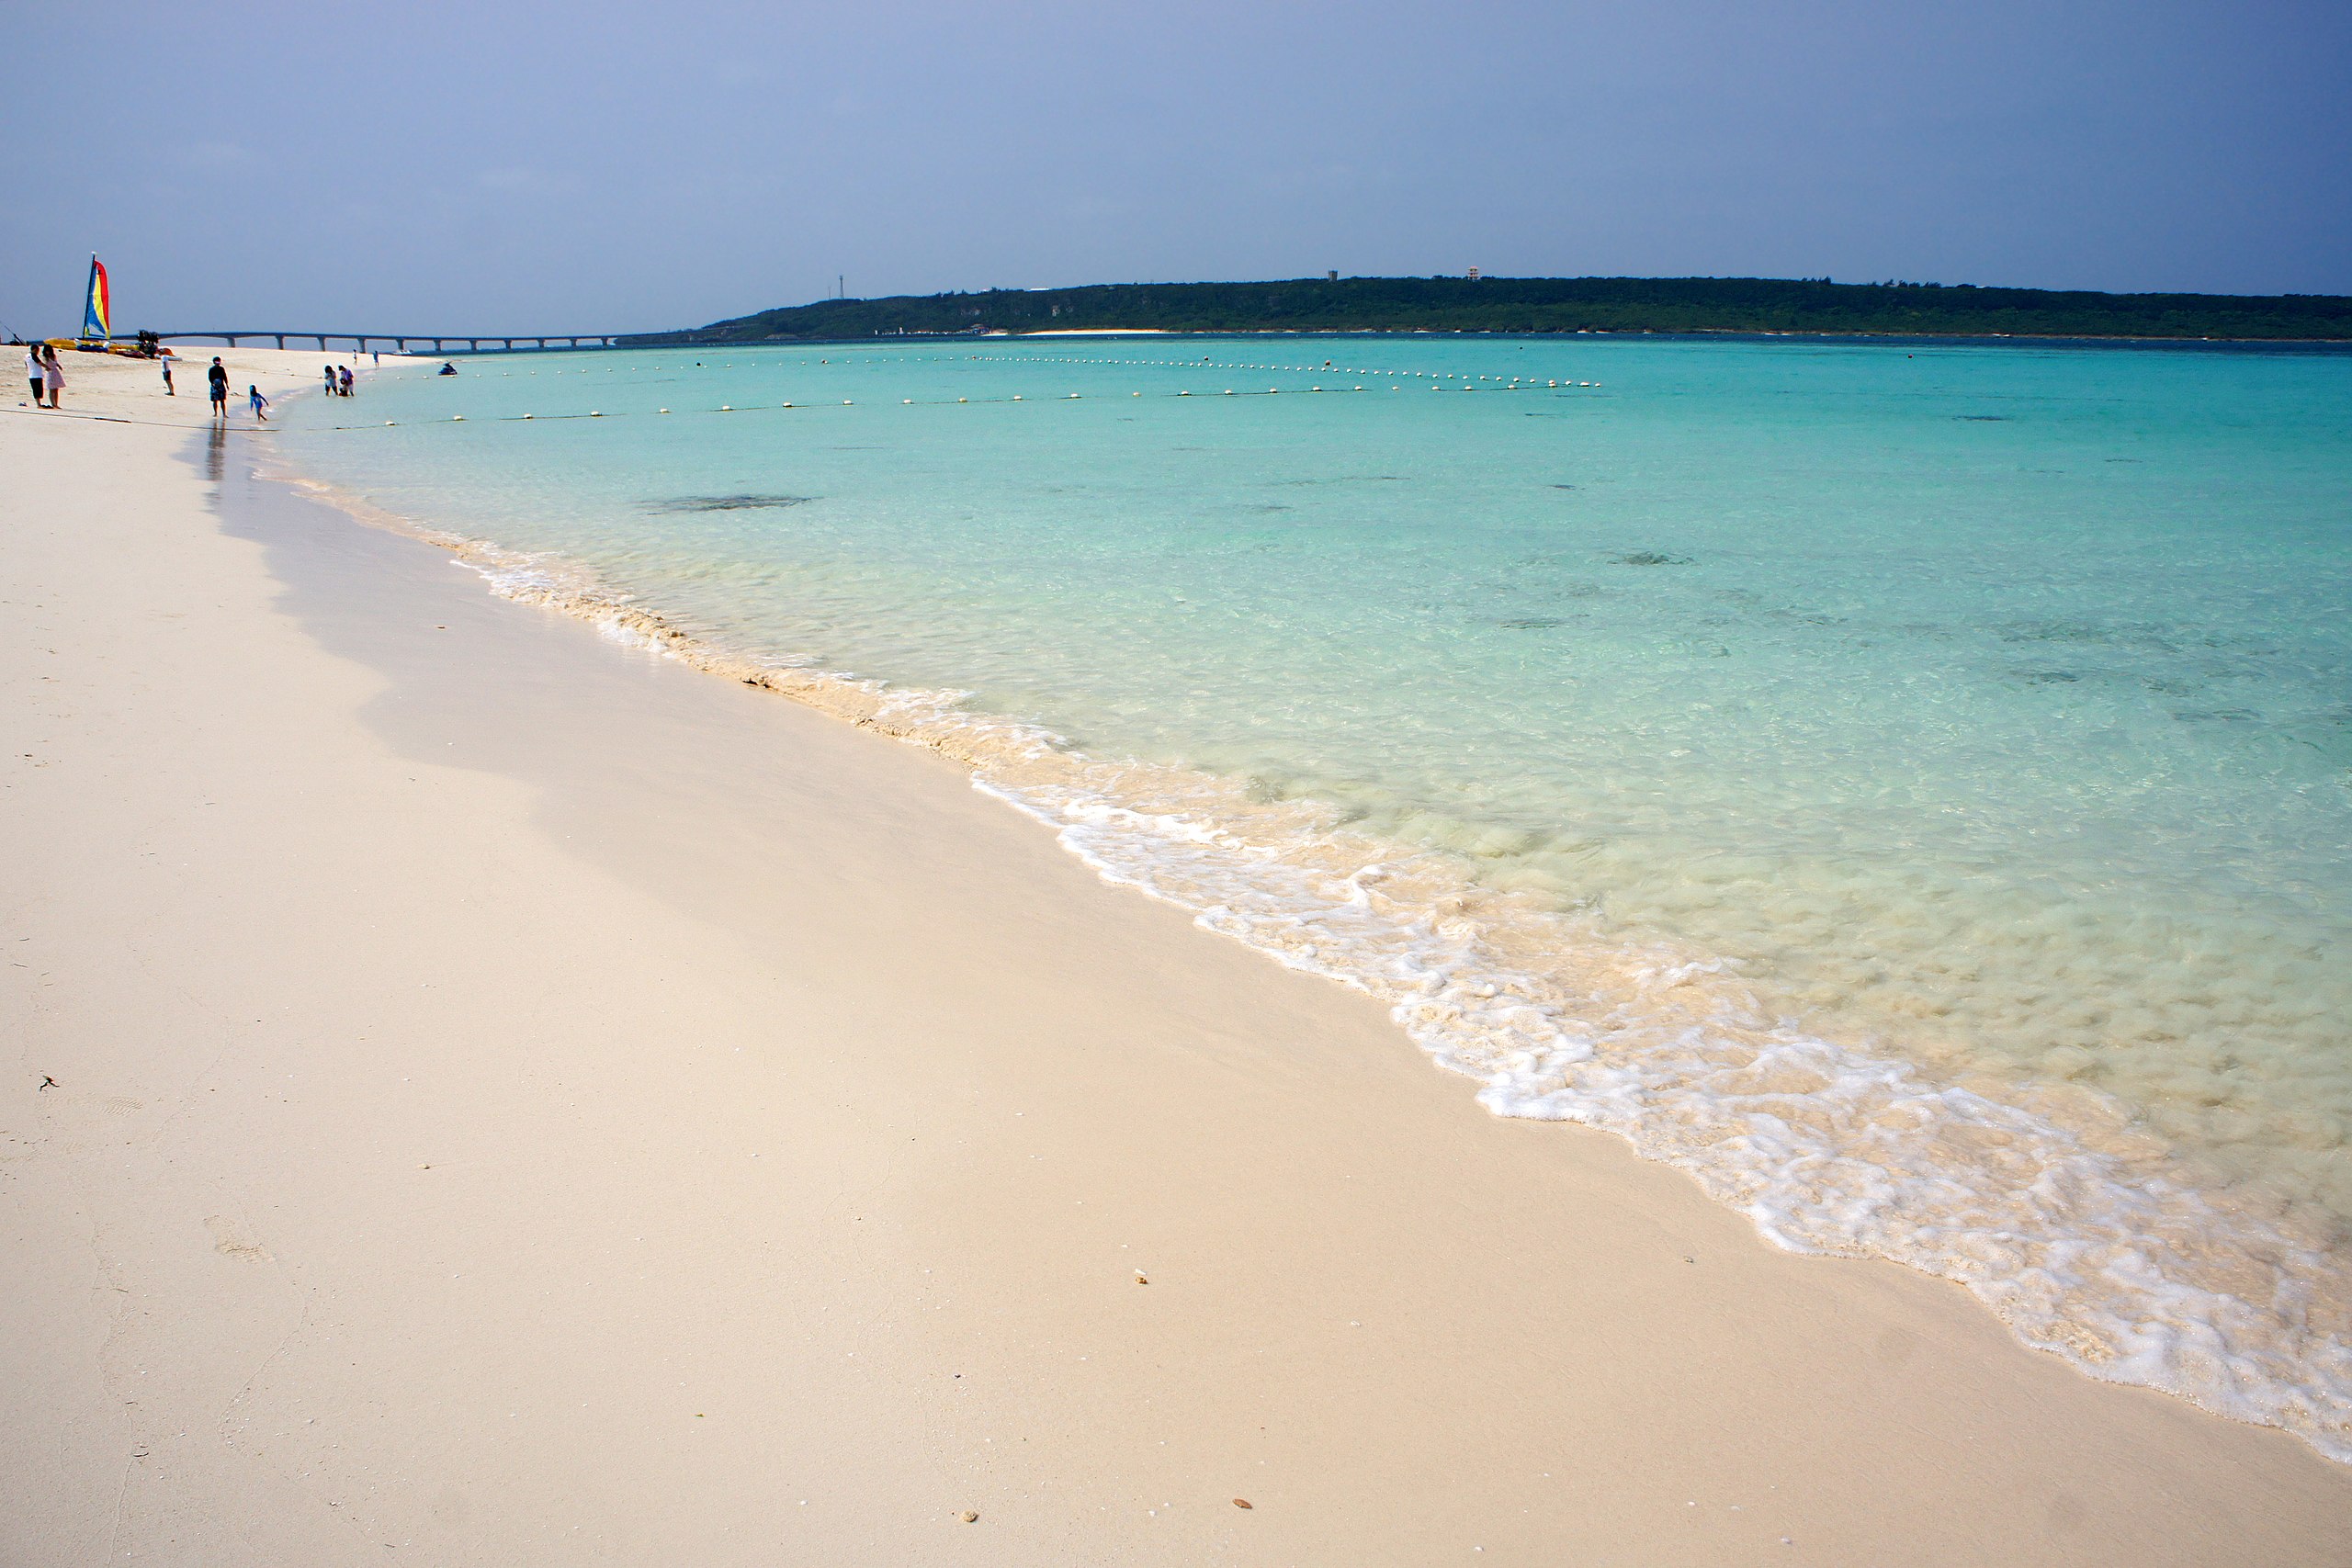 <p>Japan's own tropical paradise, the Okinawa island chain remains almost entirely unknown outside of the country. Natural beauty abounds across the whole chain, but Miyako is the most beautiful island of them all.</p>